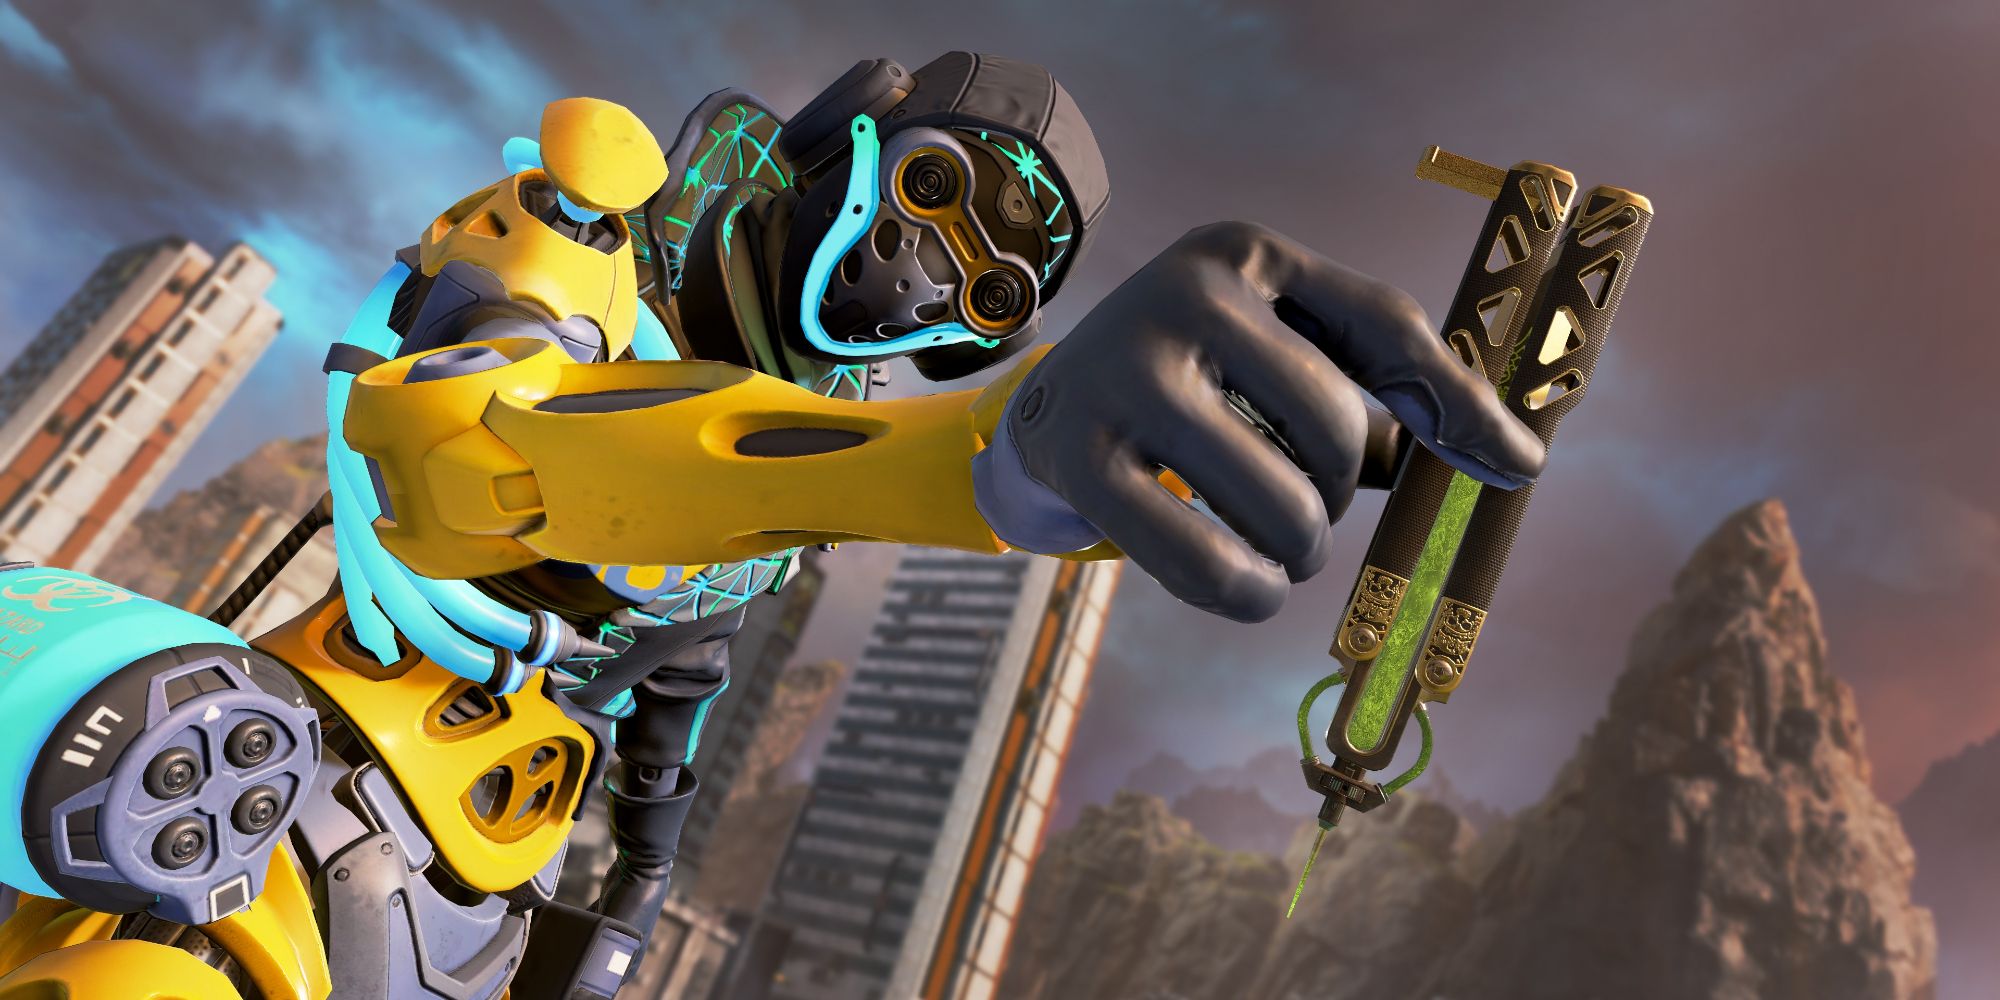 An image of Octane's Heirloom from Apex Legends, a butterfly knife with green liquid in the center of the blade.